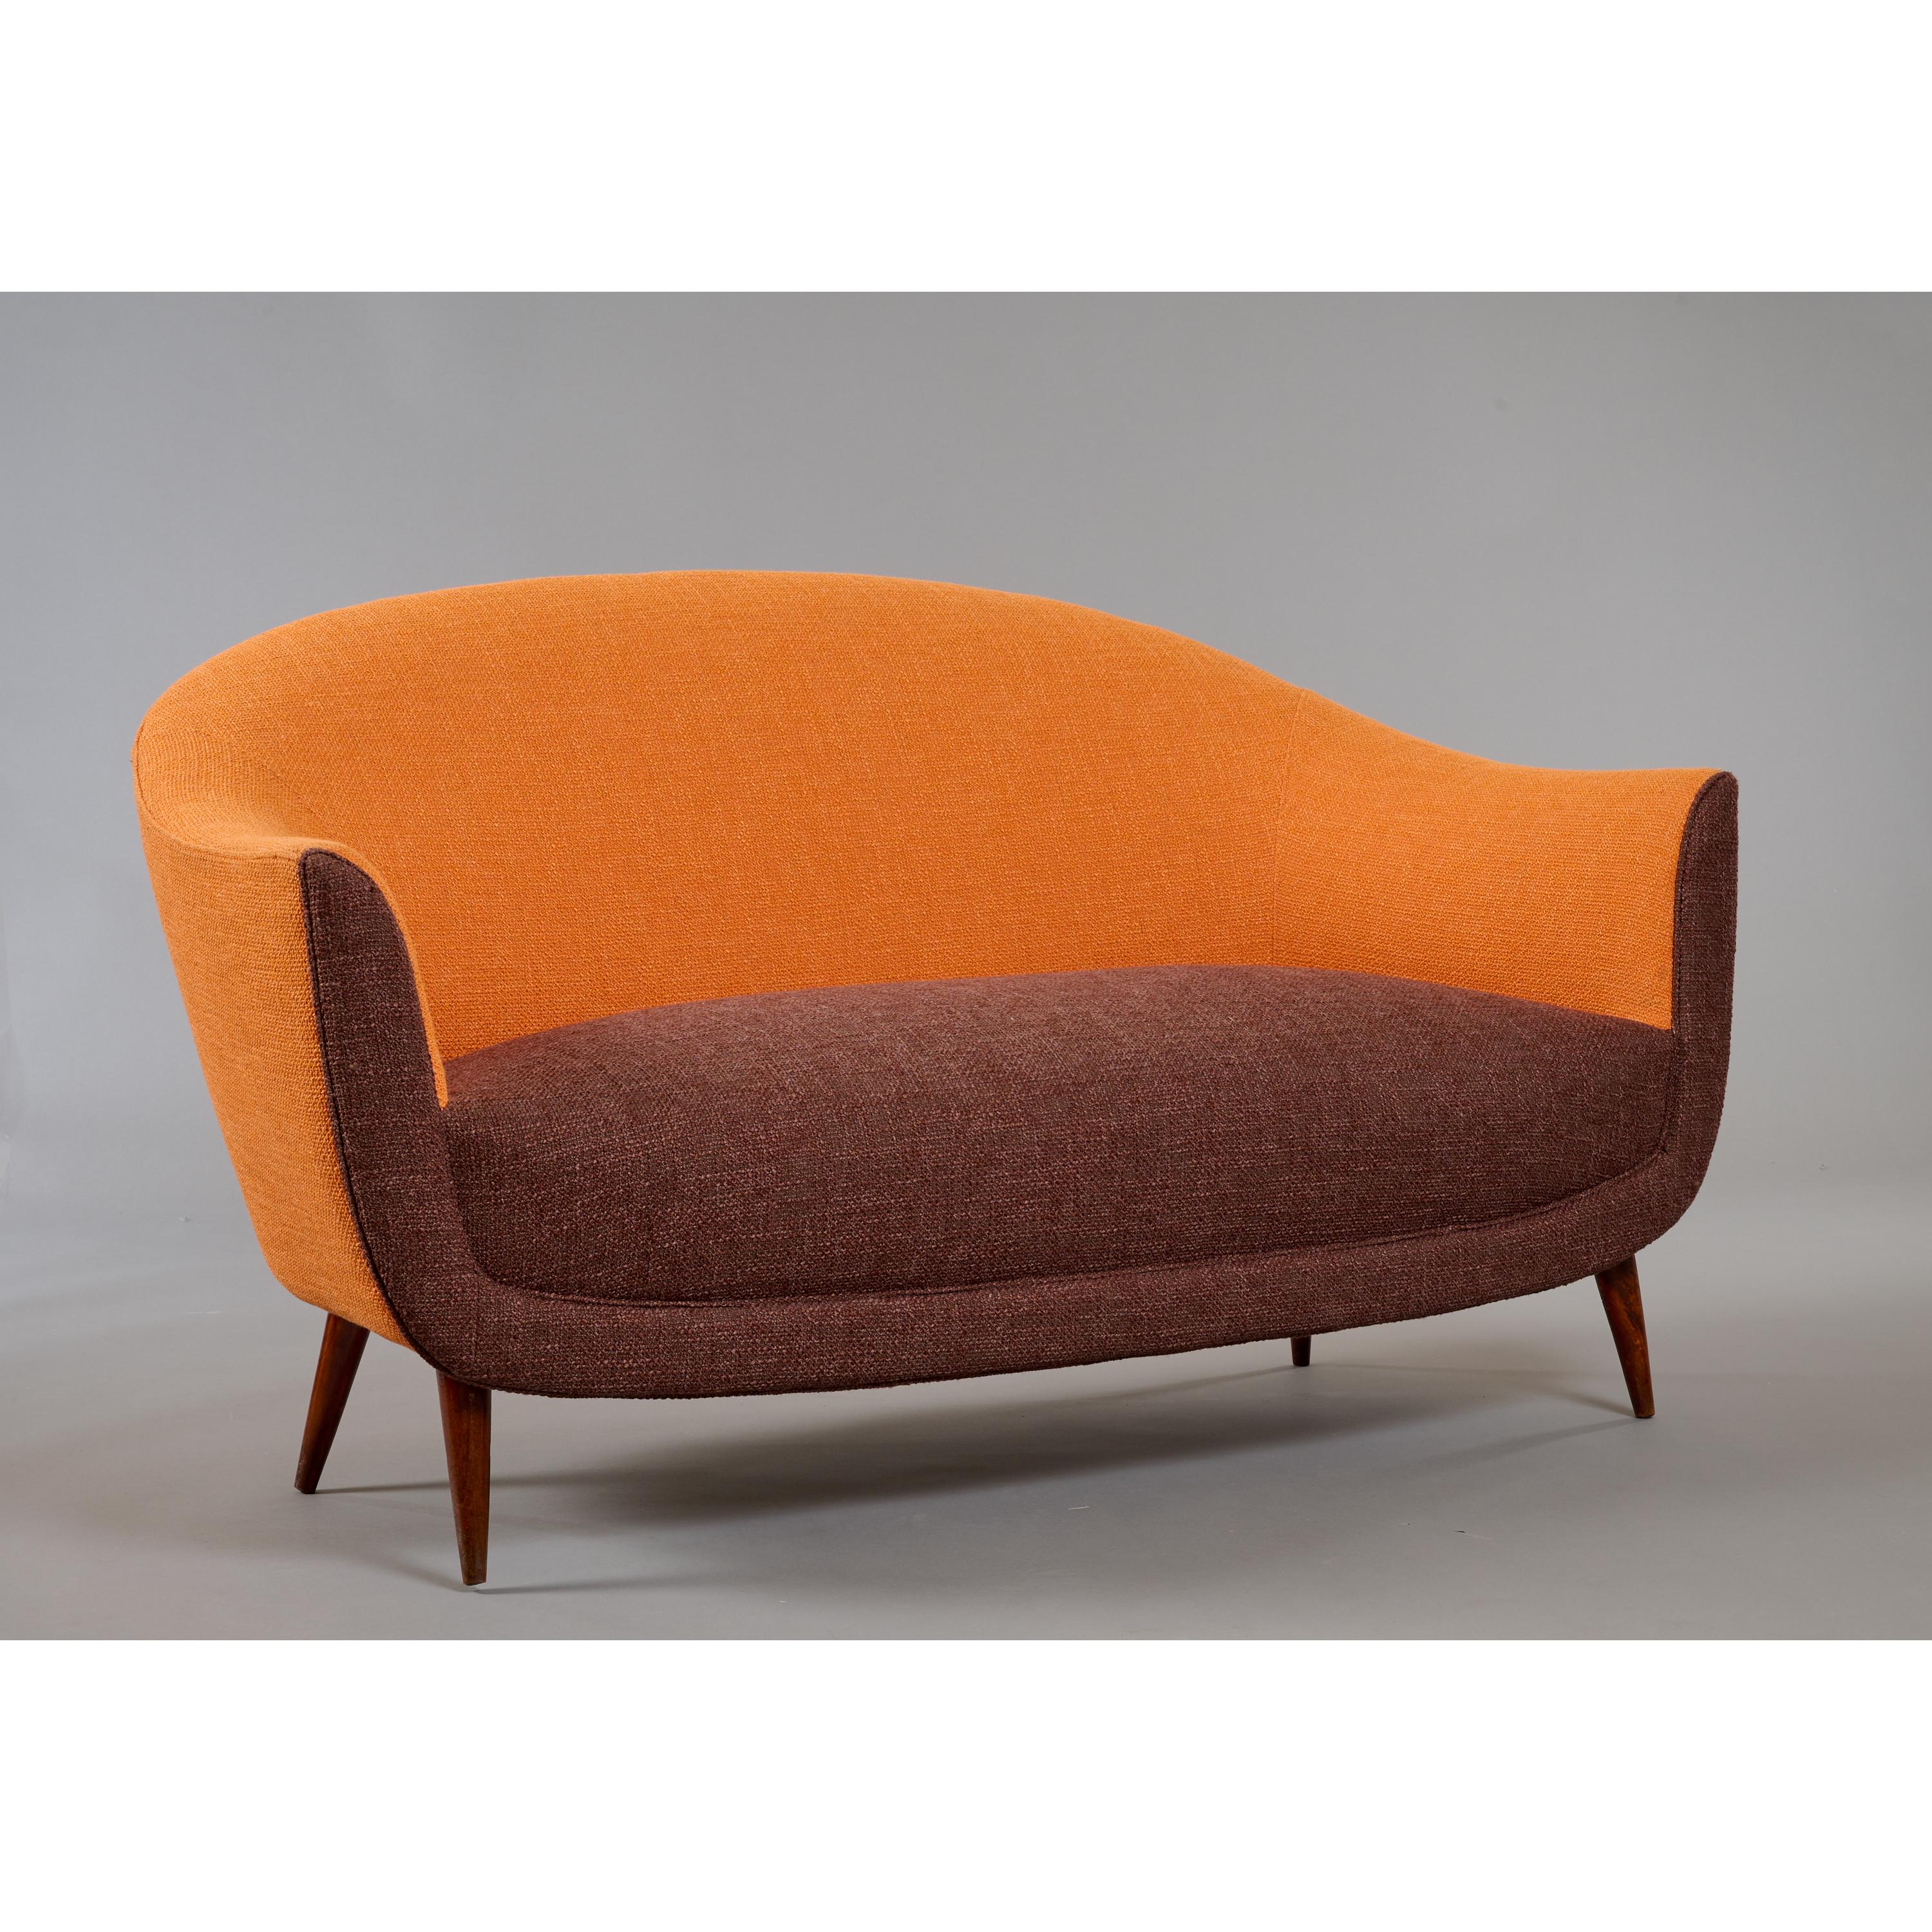 Mid-20th Century Curved ITSO Federico Munari Settee in Wood with Orange Upholstery, Italy 1950s  For Sale